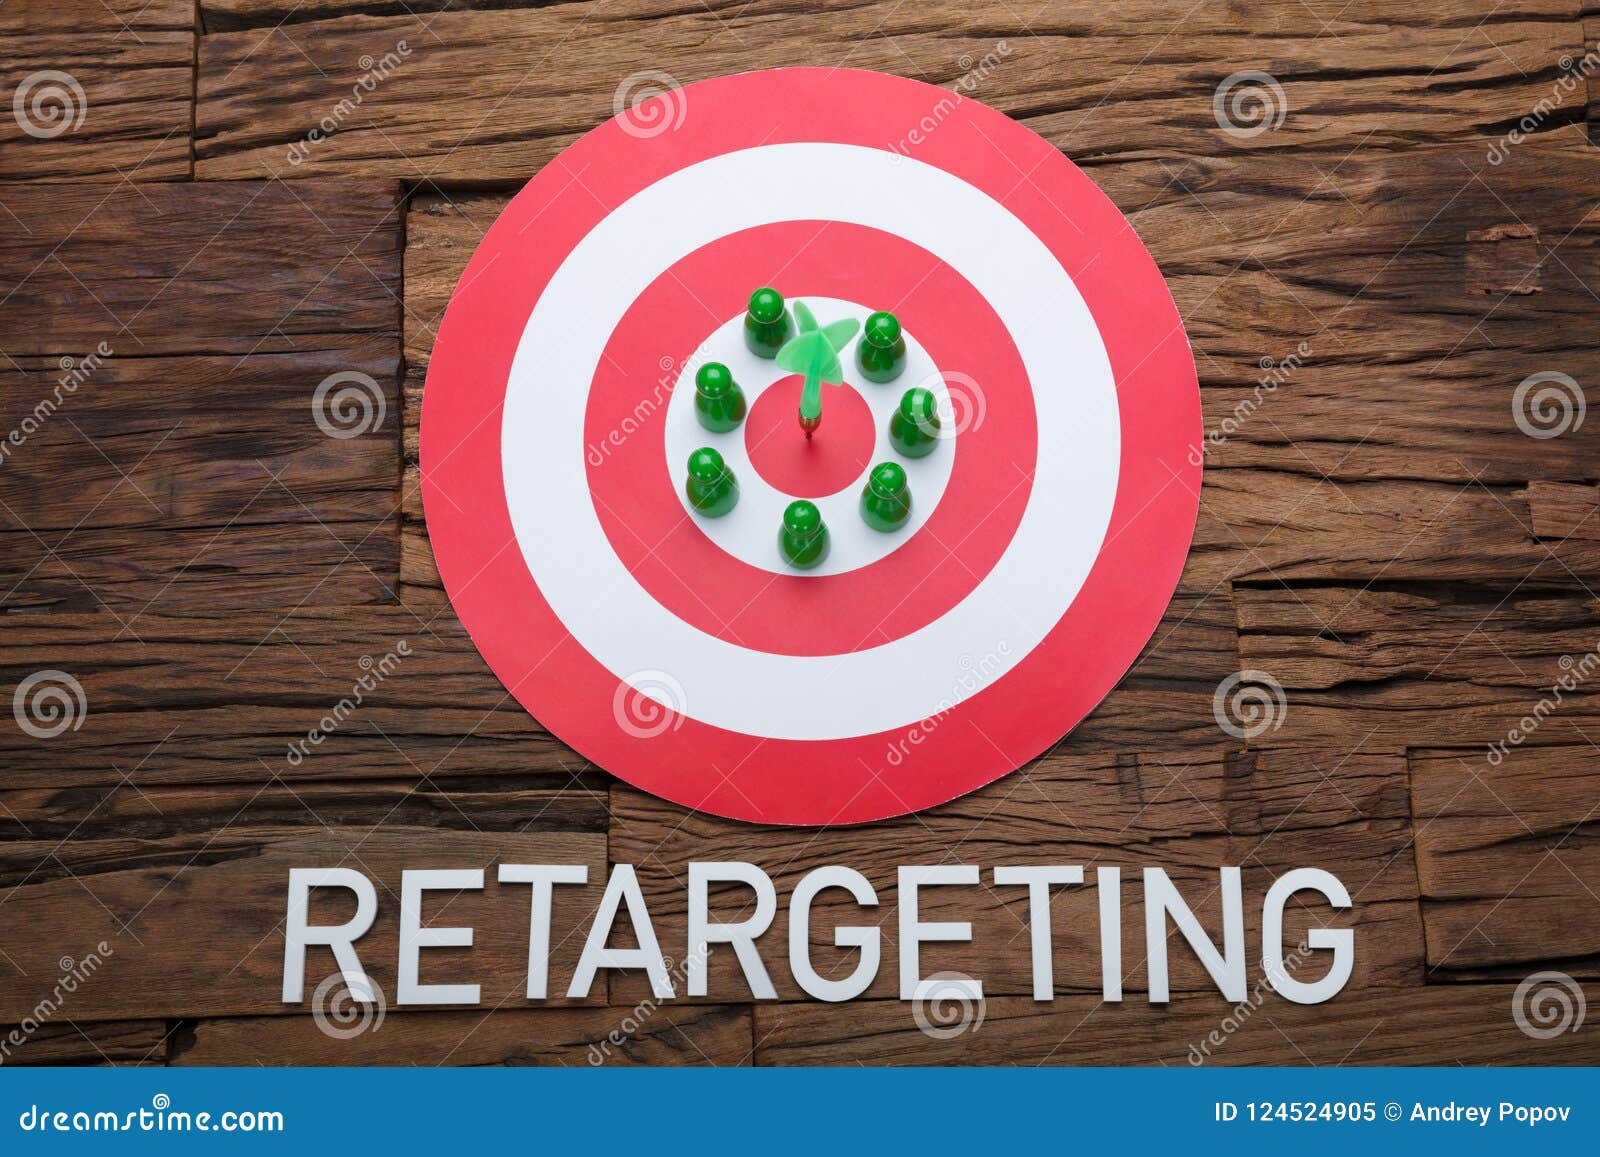 arrow and pawn figurines on dartboard with retargeting text